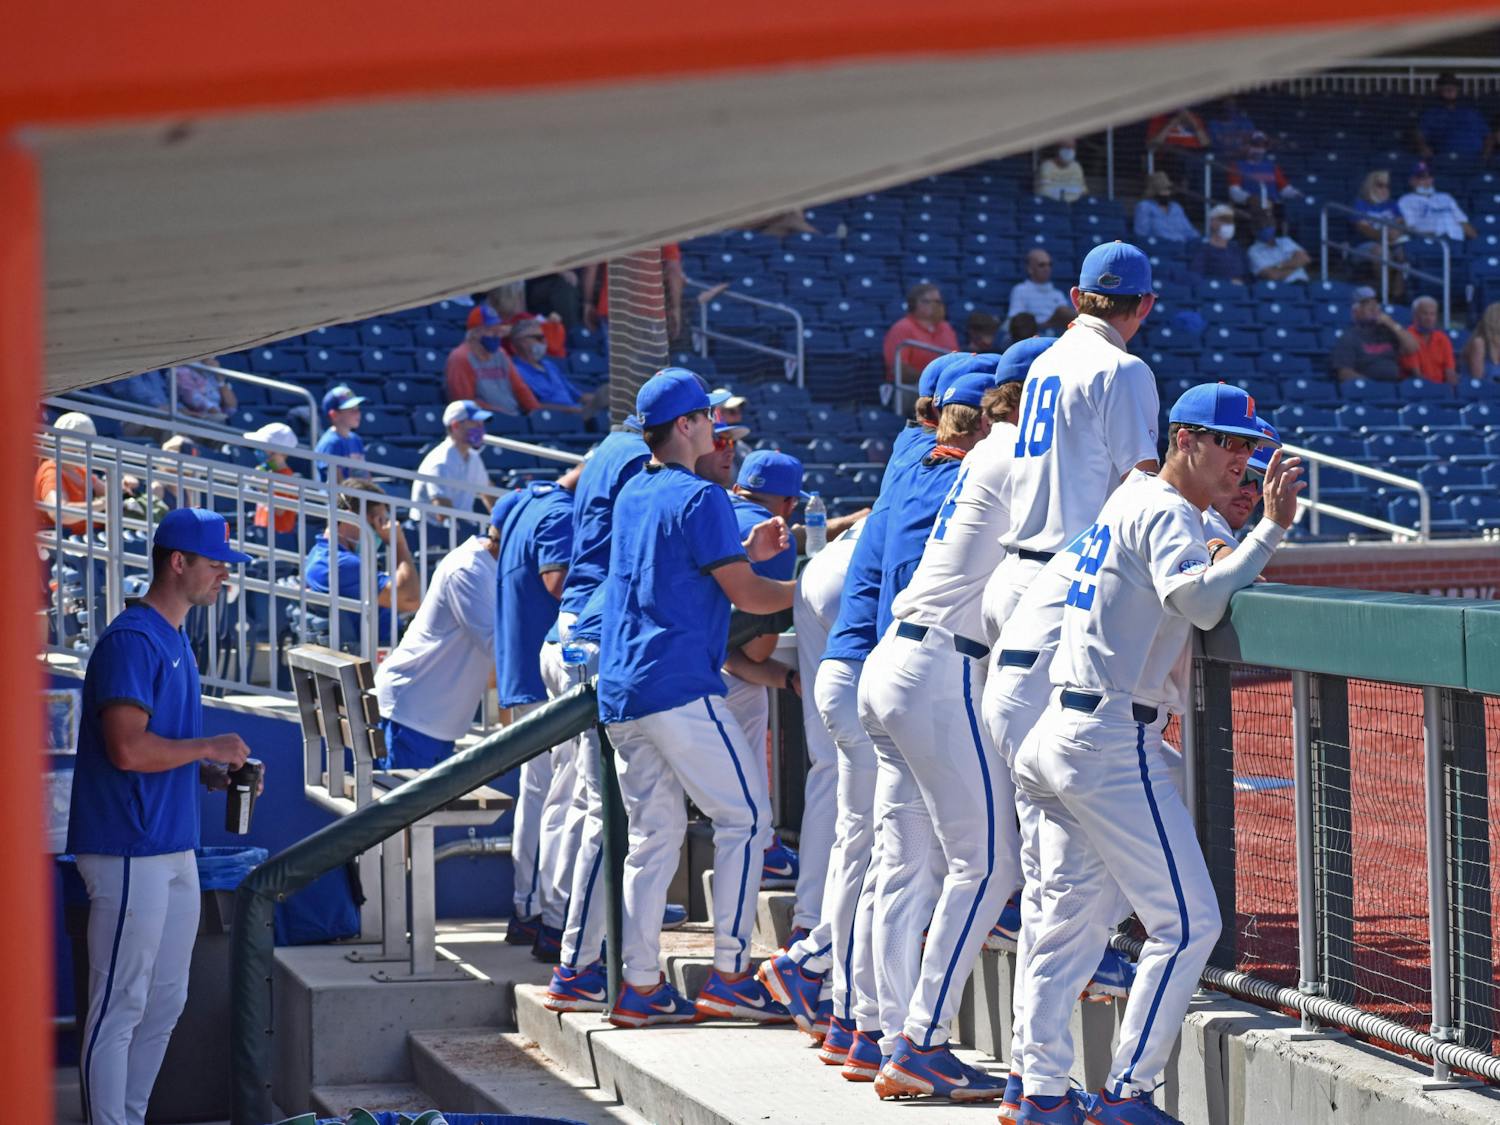 The Florida baseball team stands in the dugout during a game against Jacksonville on March 14, 2021. The Gators host the LSU Tigers for a three-game slate